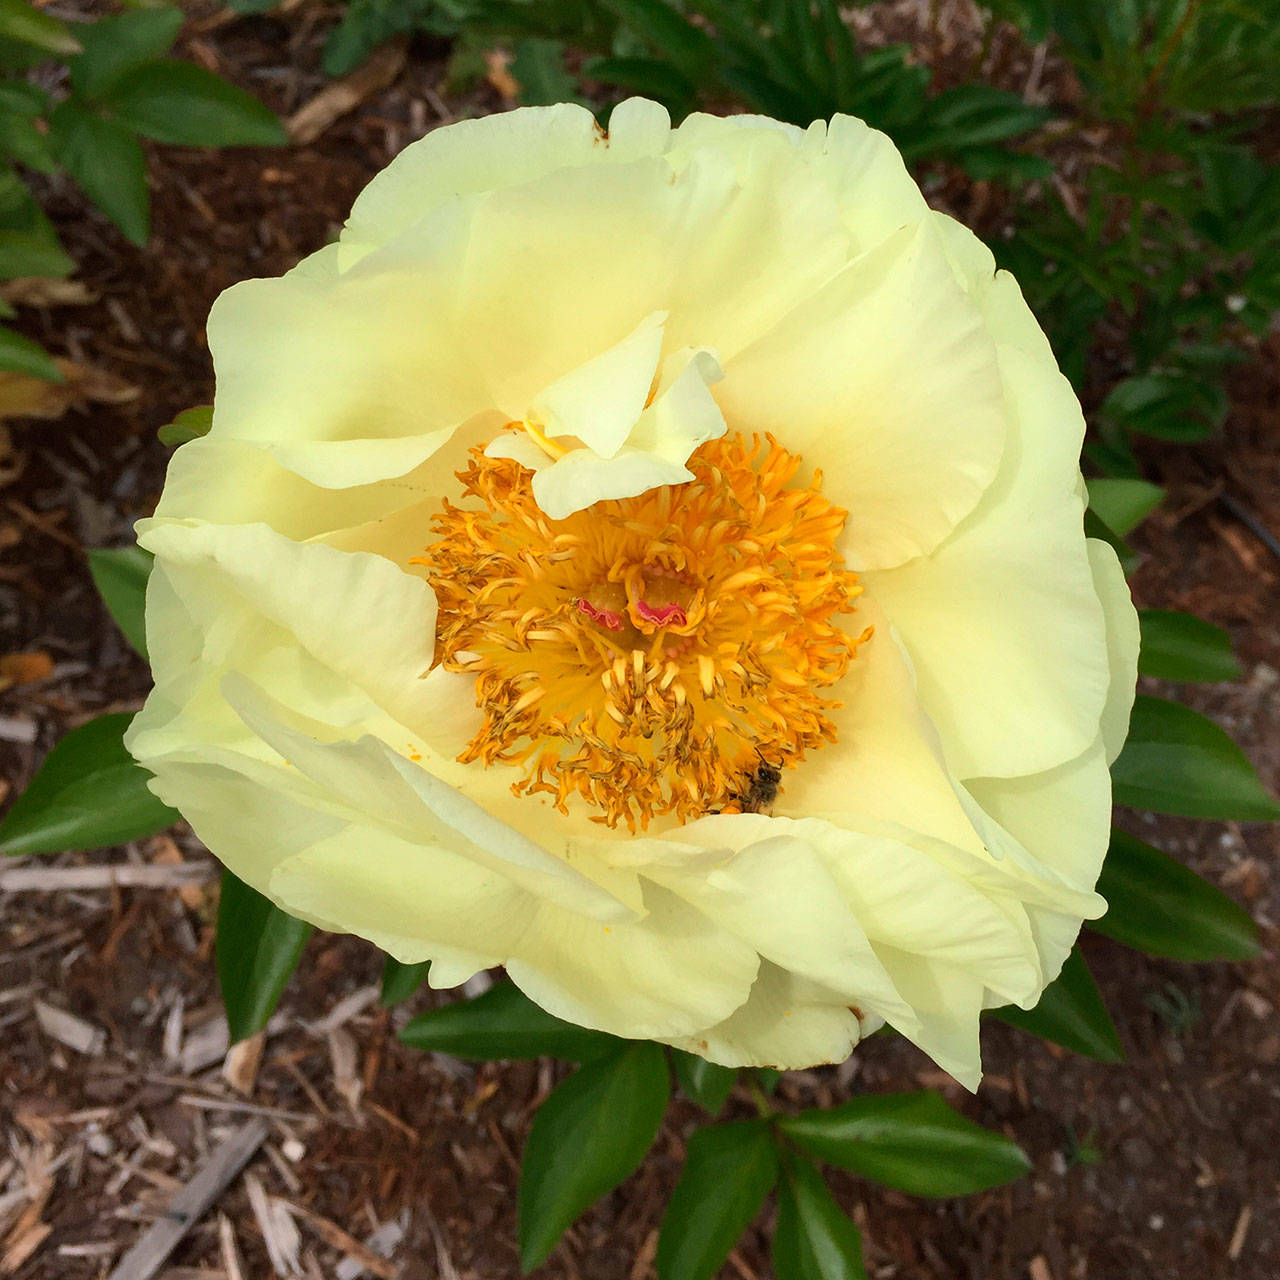 A butter yellow peony, shown here, is one type of flowers participants can expect to see at the Sequim Botanical Garden Society “Work to Learn” Party on Saturday. (Renne Emiko Brock)